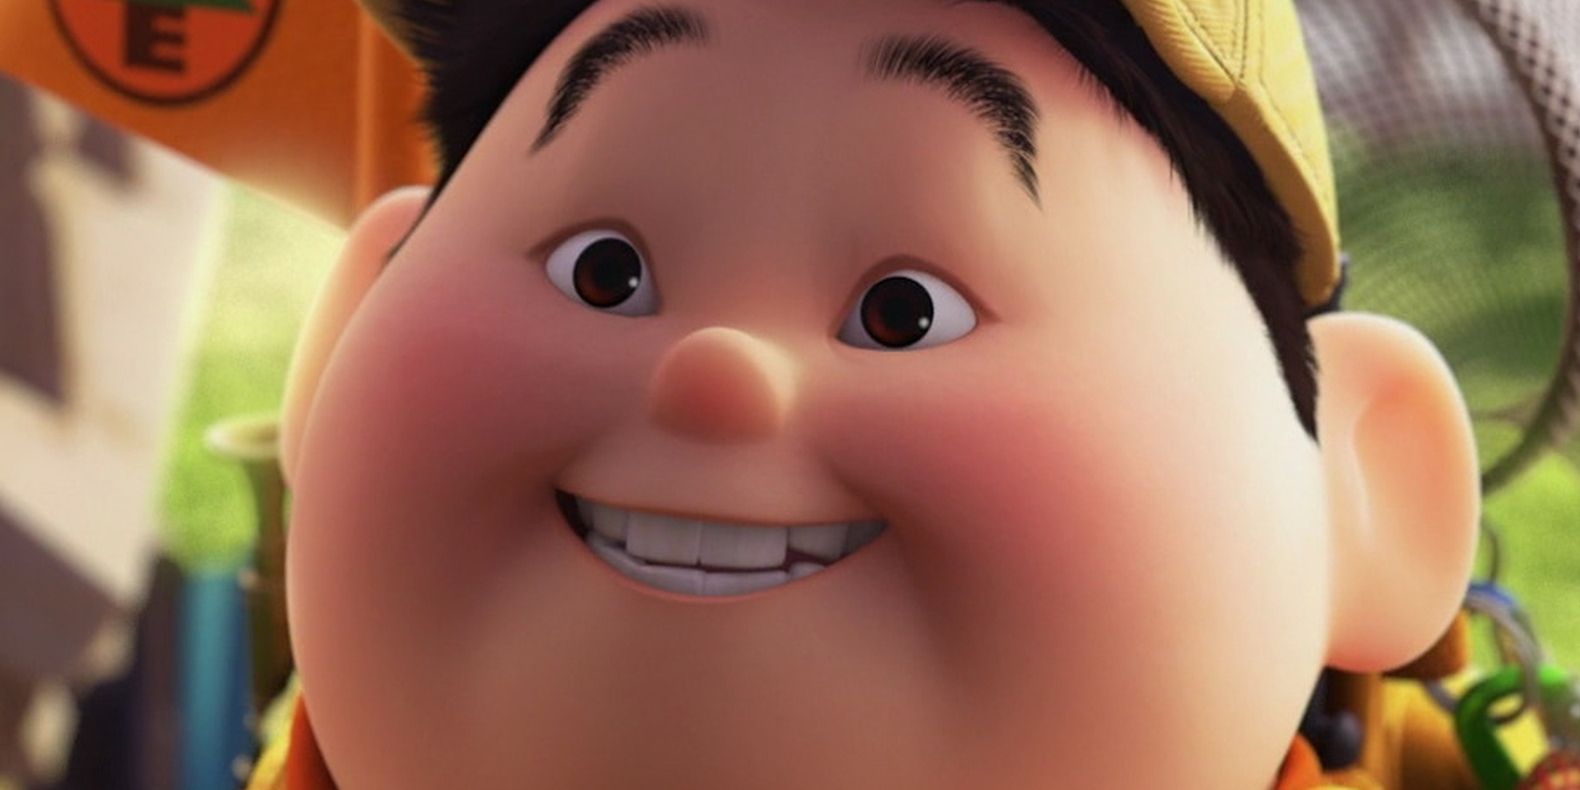 Russell smiling in Pixar's Up.